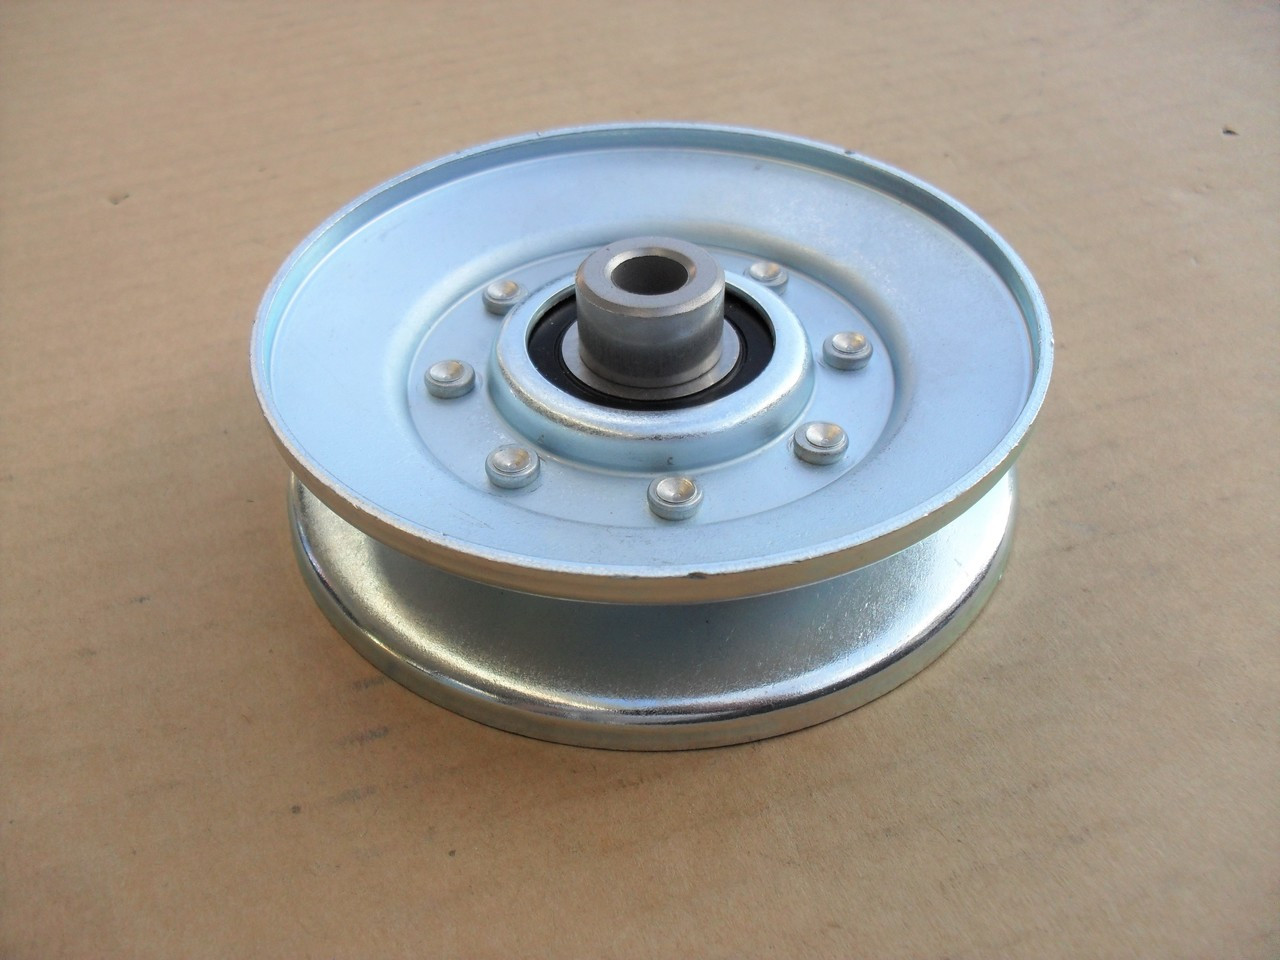 Drive Idler Pulley for Troy Bilt Bronco 1726660 756-0226 756-0293 756-0293A 756-0487 756-1208 ID: 3/8" OD: 4"